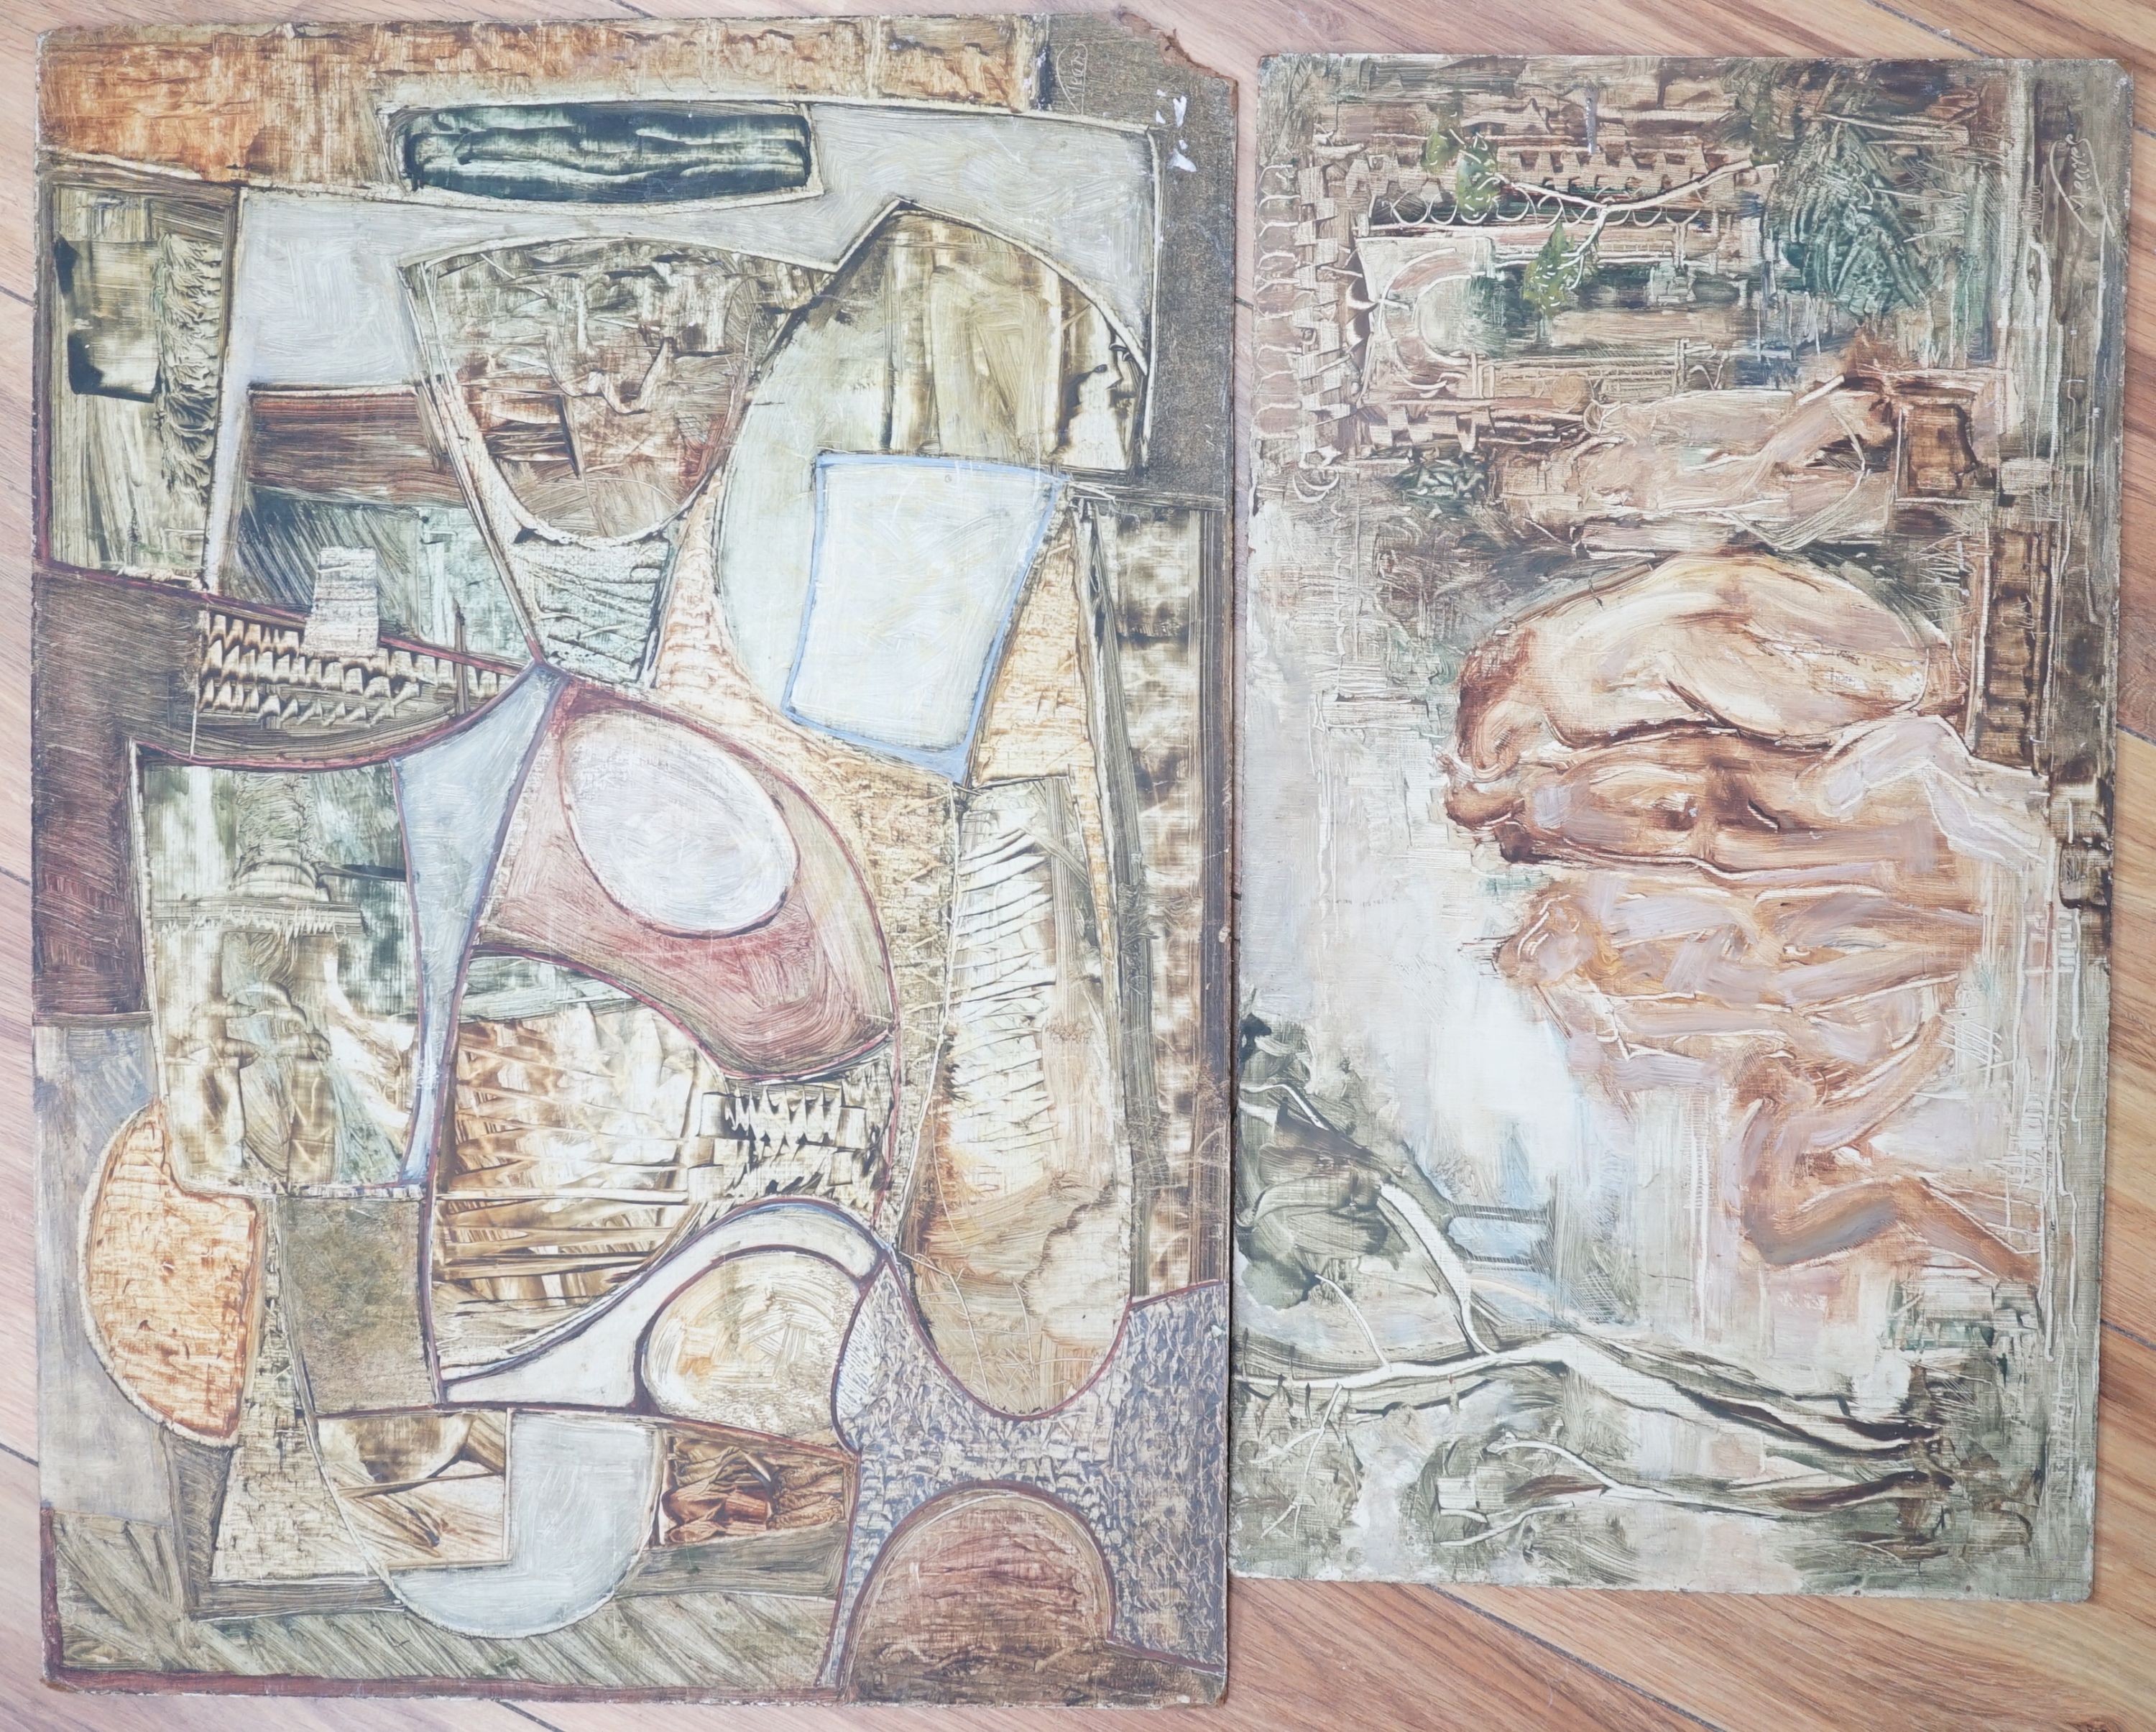 Gerald Meares, two oils on board, Bathers and Abstract form, both signed, 25 x 45cm and 36 x 51cm, unframed